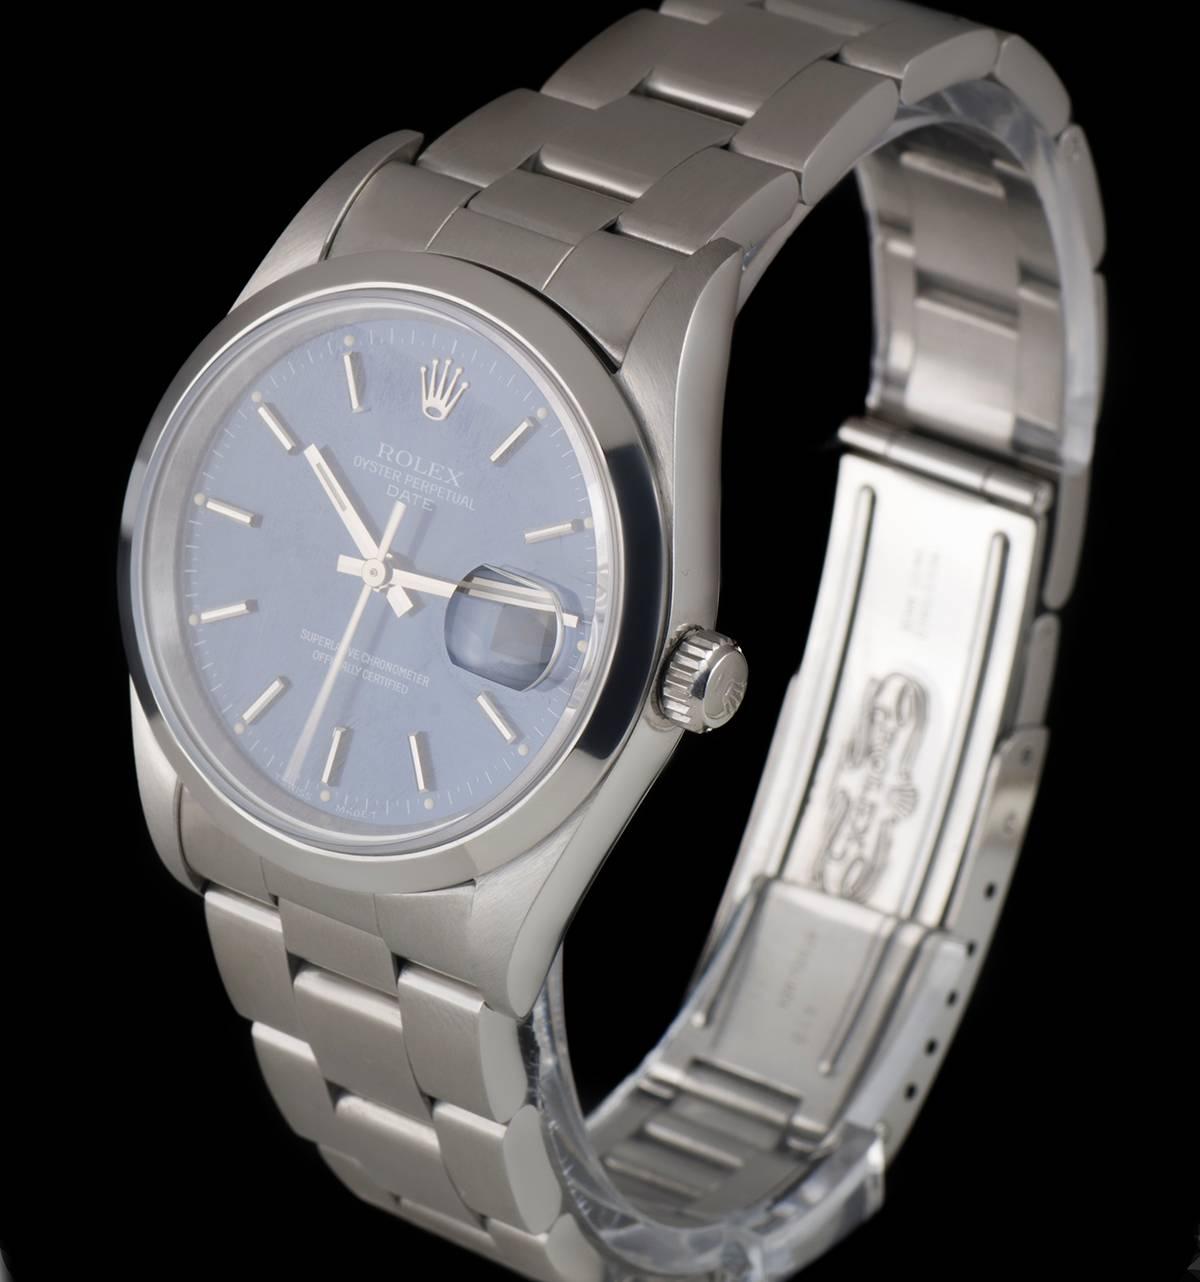 A Stainless Steel Oyster Perpetual Date Gents Wristwatch, blue dial with applied hour markers, date at 3 0'clock, a fixed stainless steel smooth bezel, a stainless steel oyster bracelet with a stainless steel deployant clasp, sapphire glass,